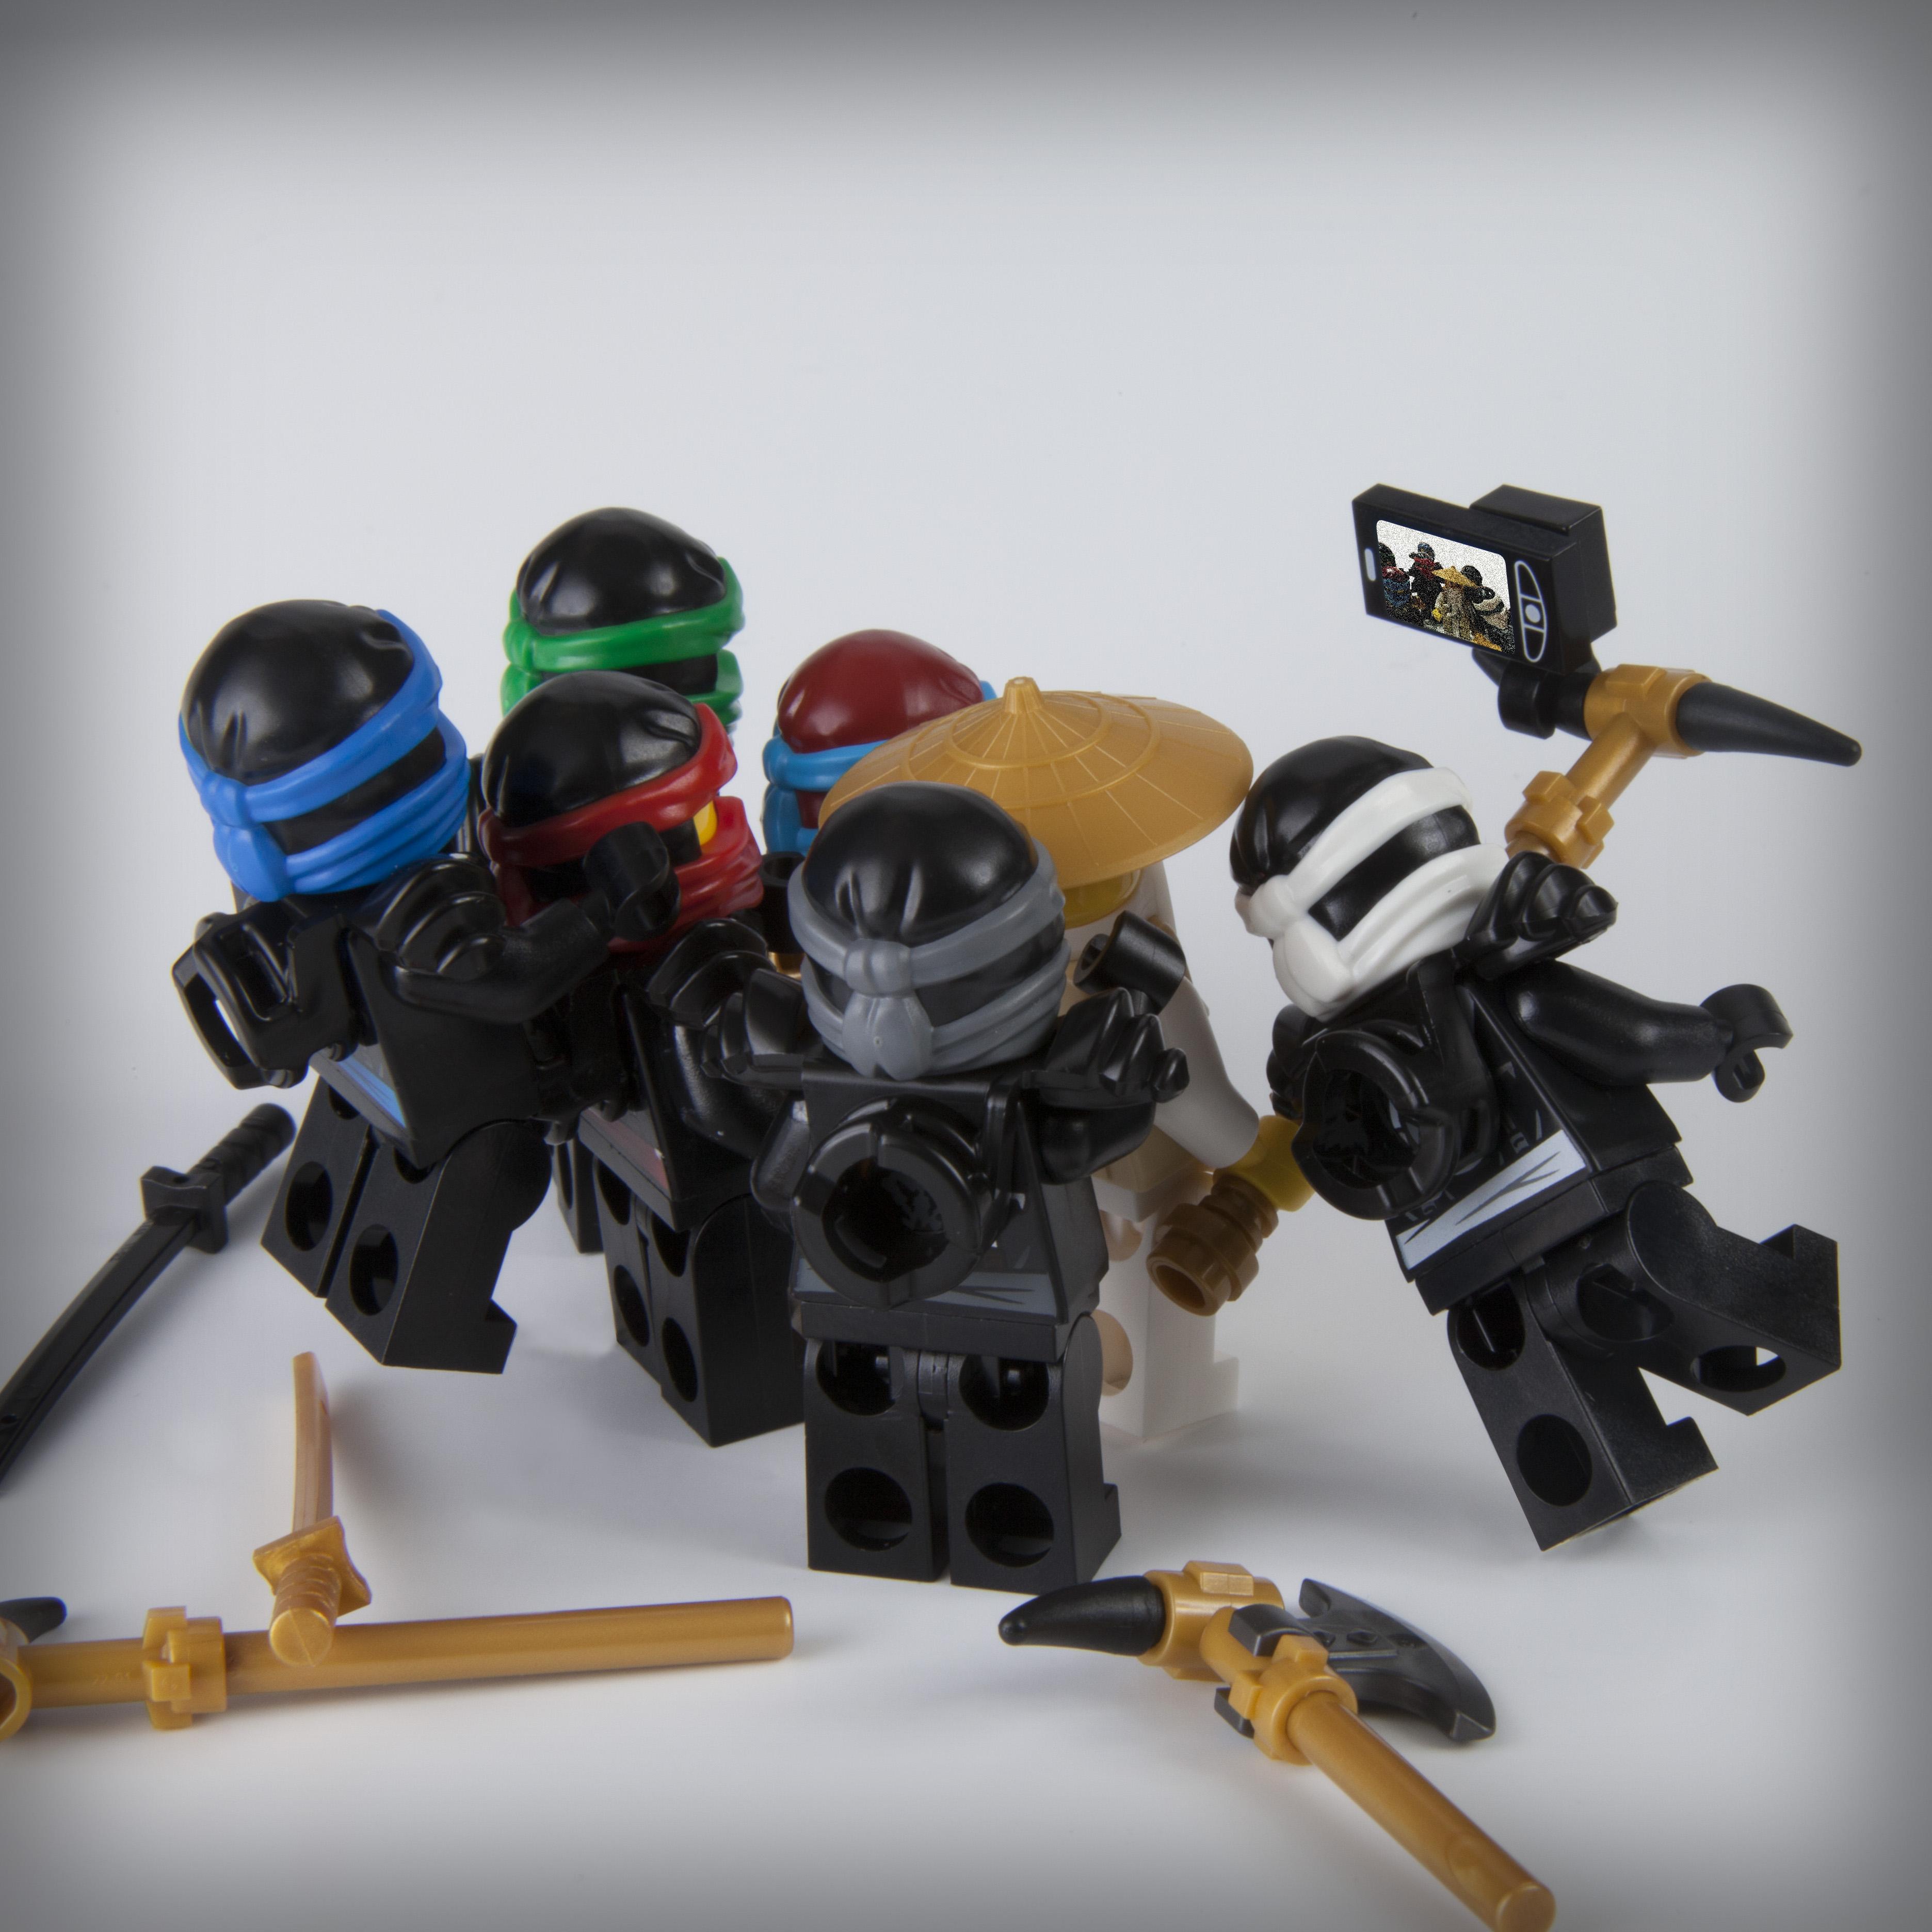 Omgeving Kolonisten aflevering LEGO on Twitter: "Say cheese! Check out the new LEGO Ninjago products  available now http://t.co/OyZGmbTZqL #SenseiStick http://t.co/W4FW0nIpAw" /  Twitter